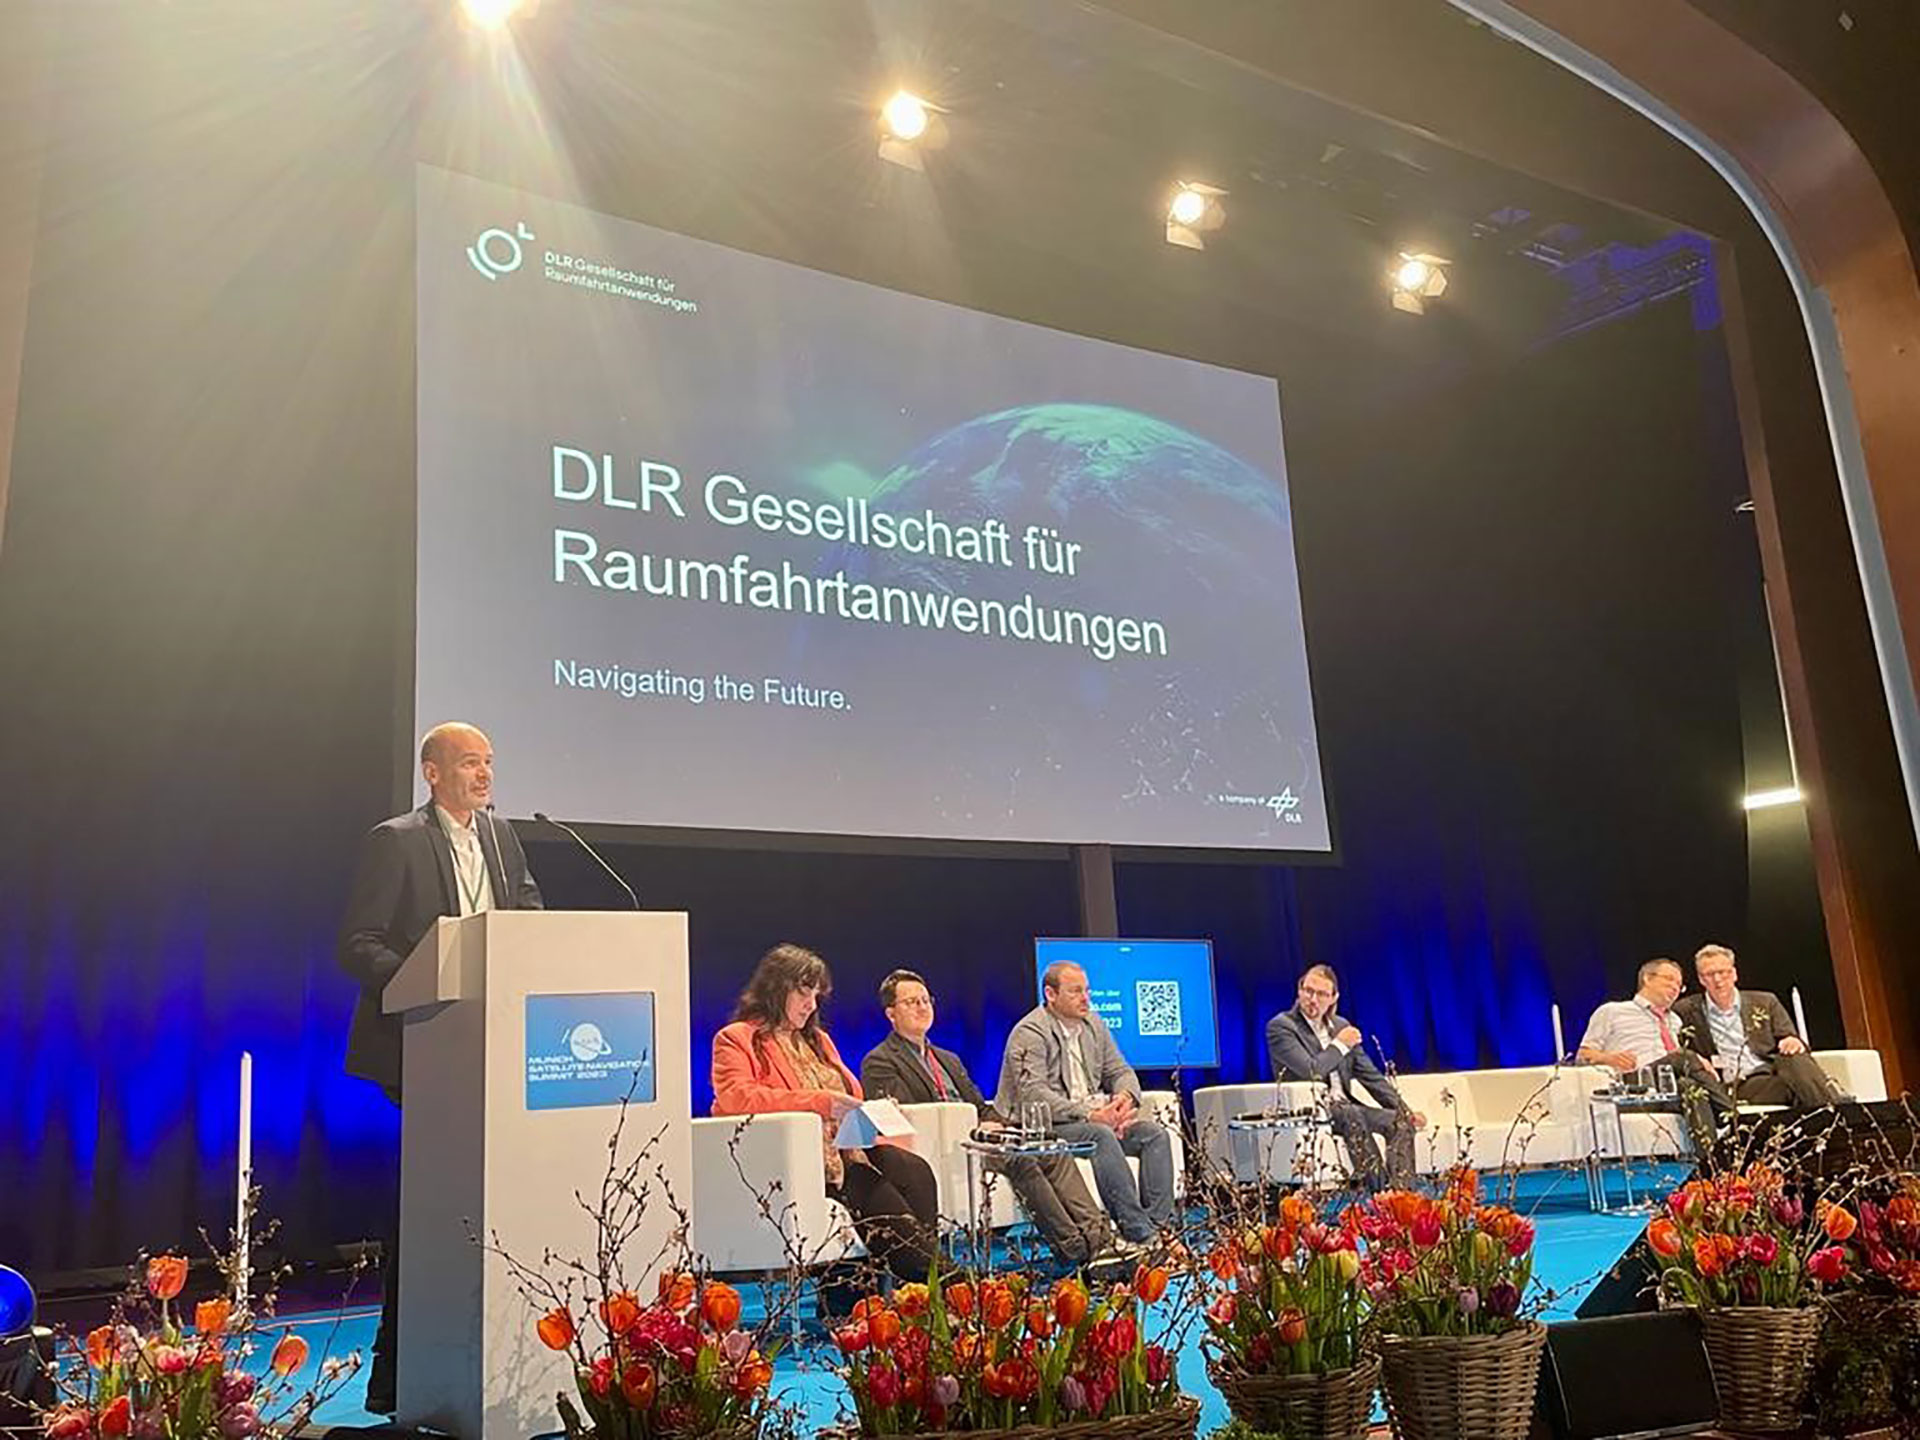 “Operations in safe hands with us” – DLR GfR at the Munich Satellite Navigation Summit